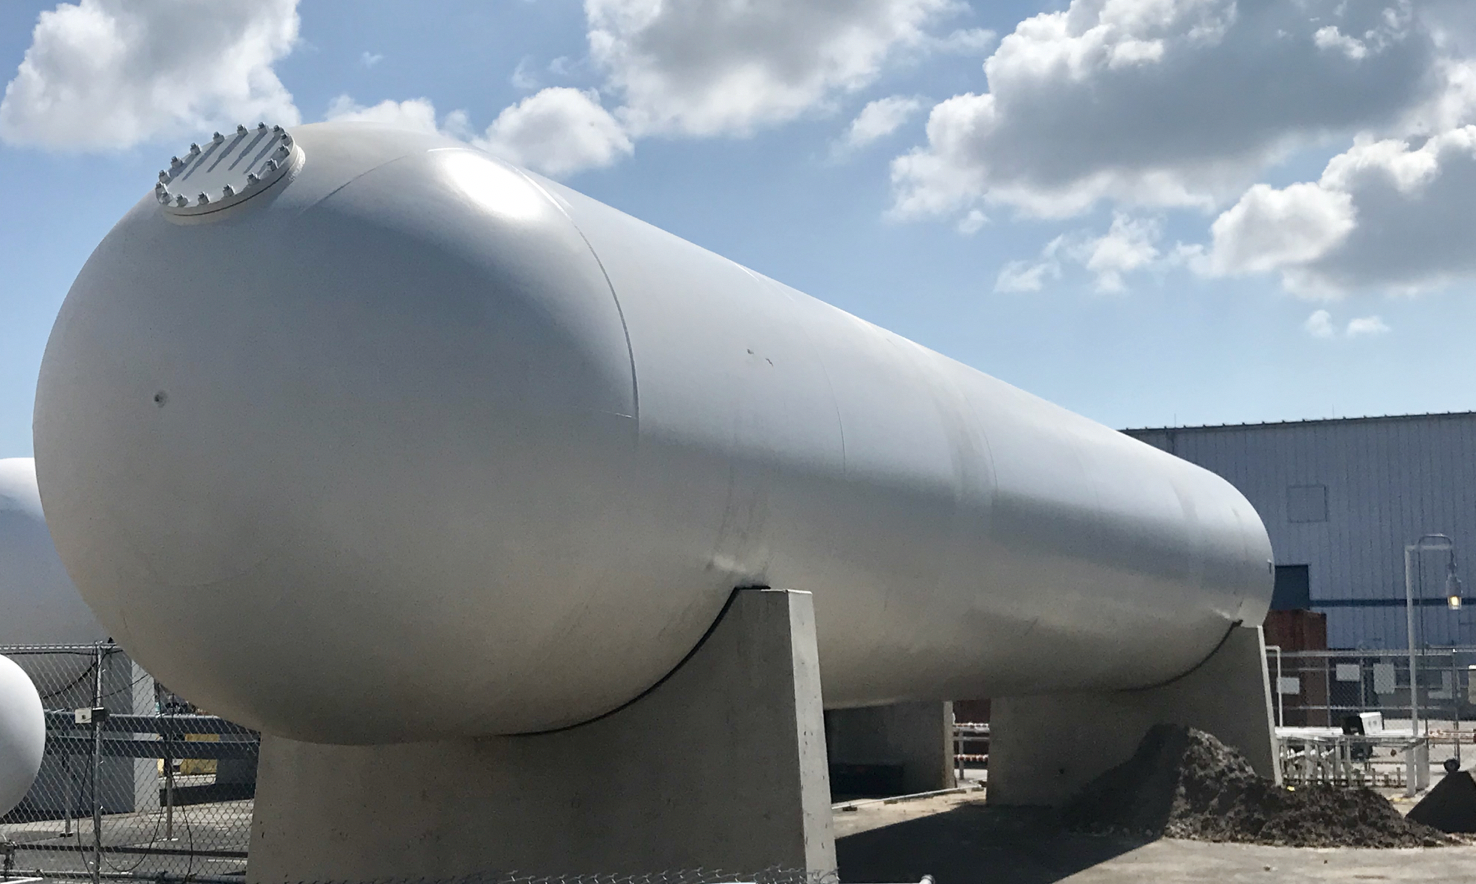 Pressurized Packaging Throughput Grows as Formulated Solutions Installs New 30,000 Gallon Propellant Tank.